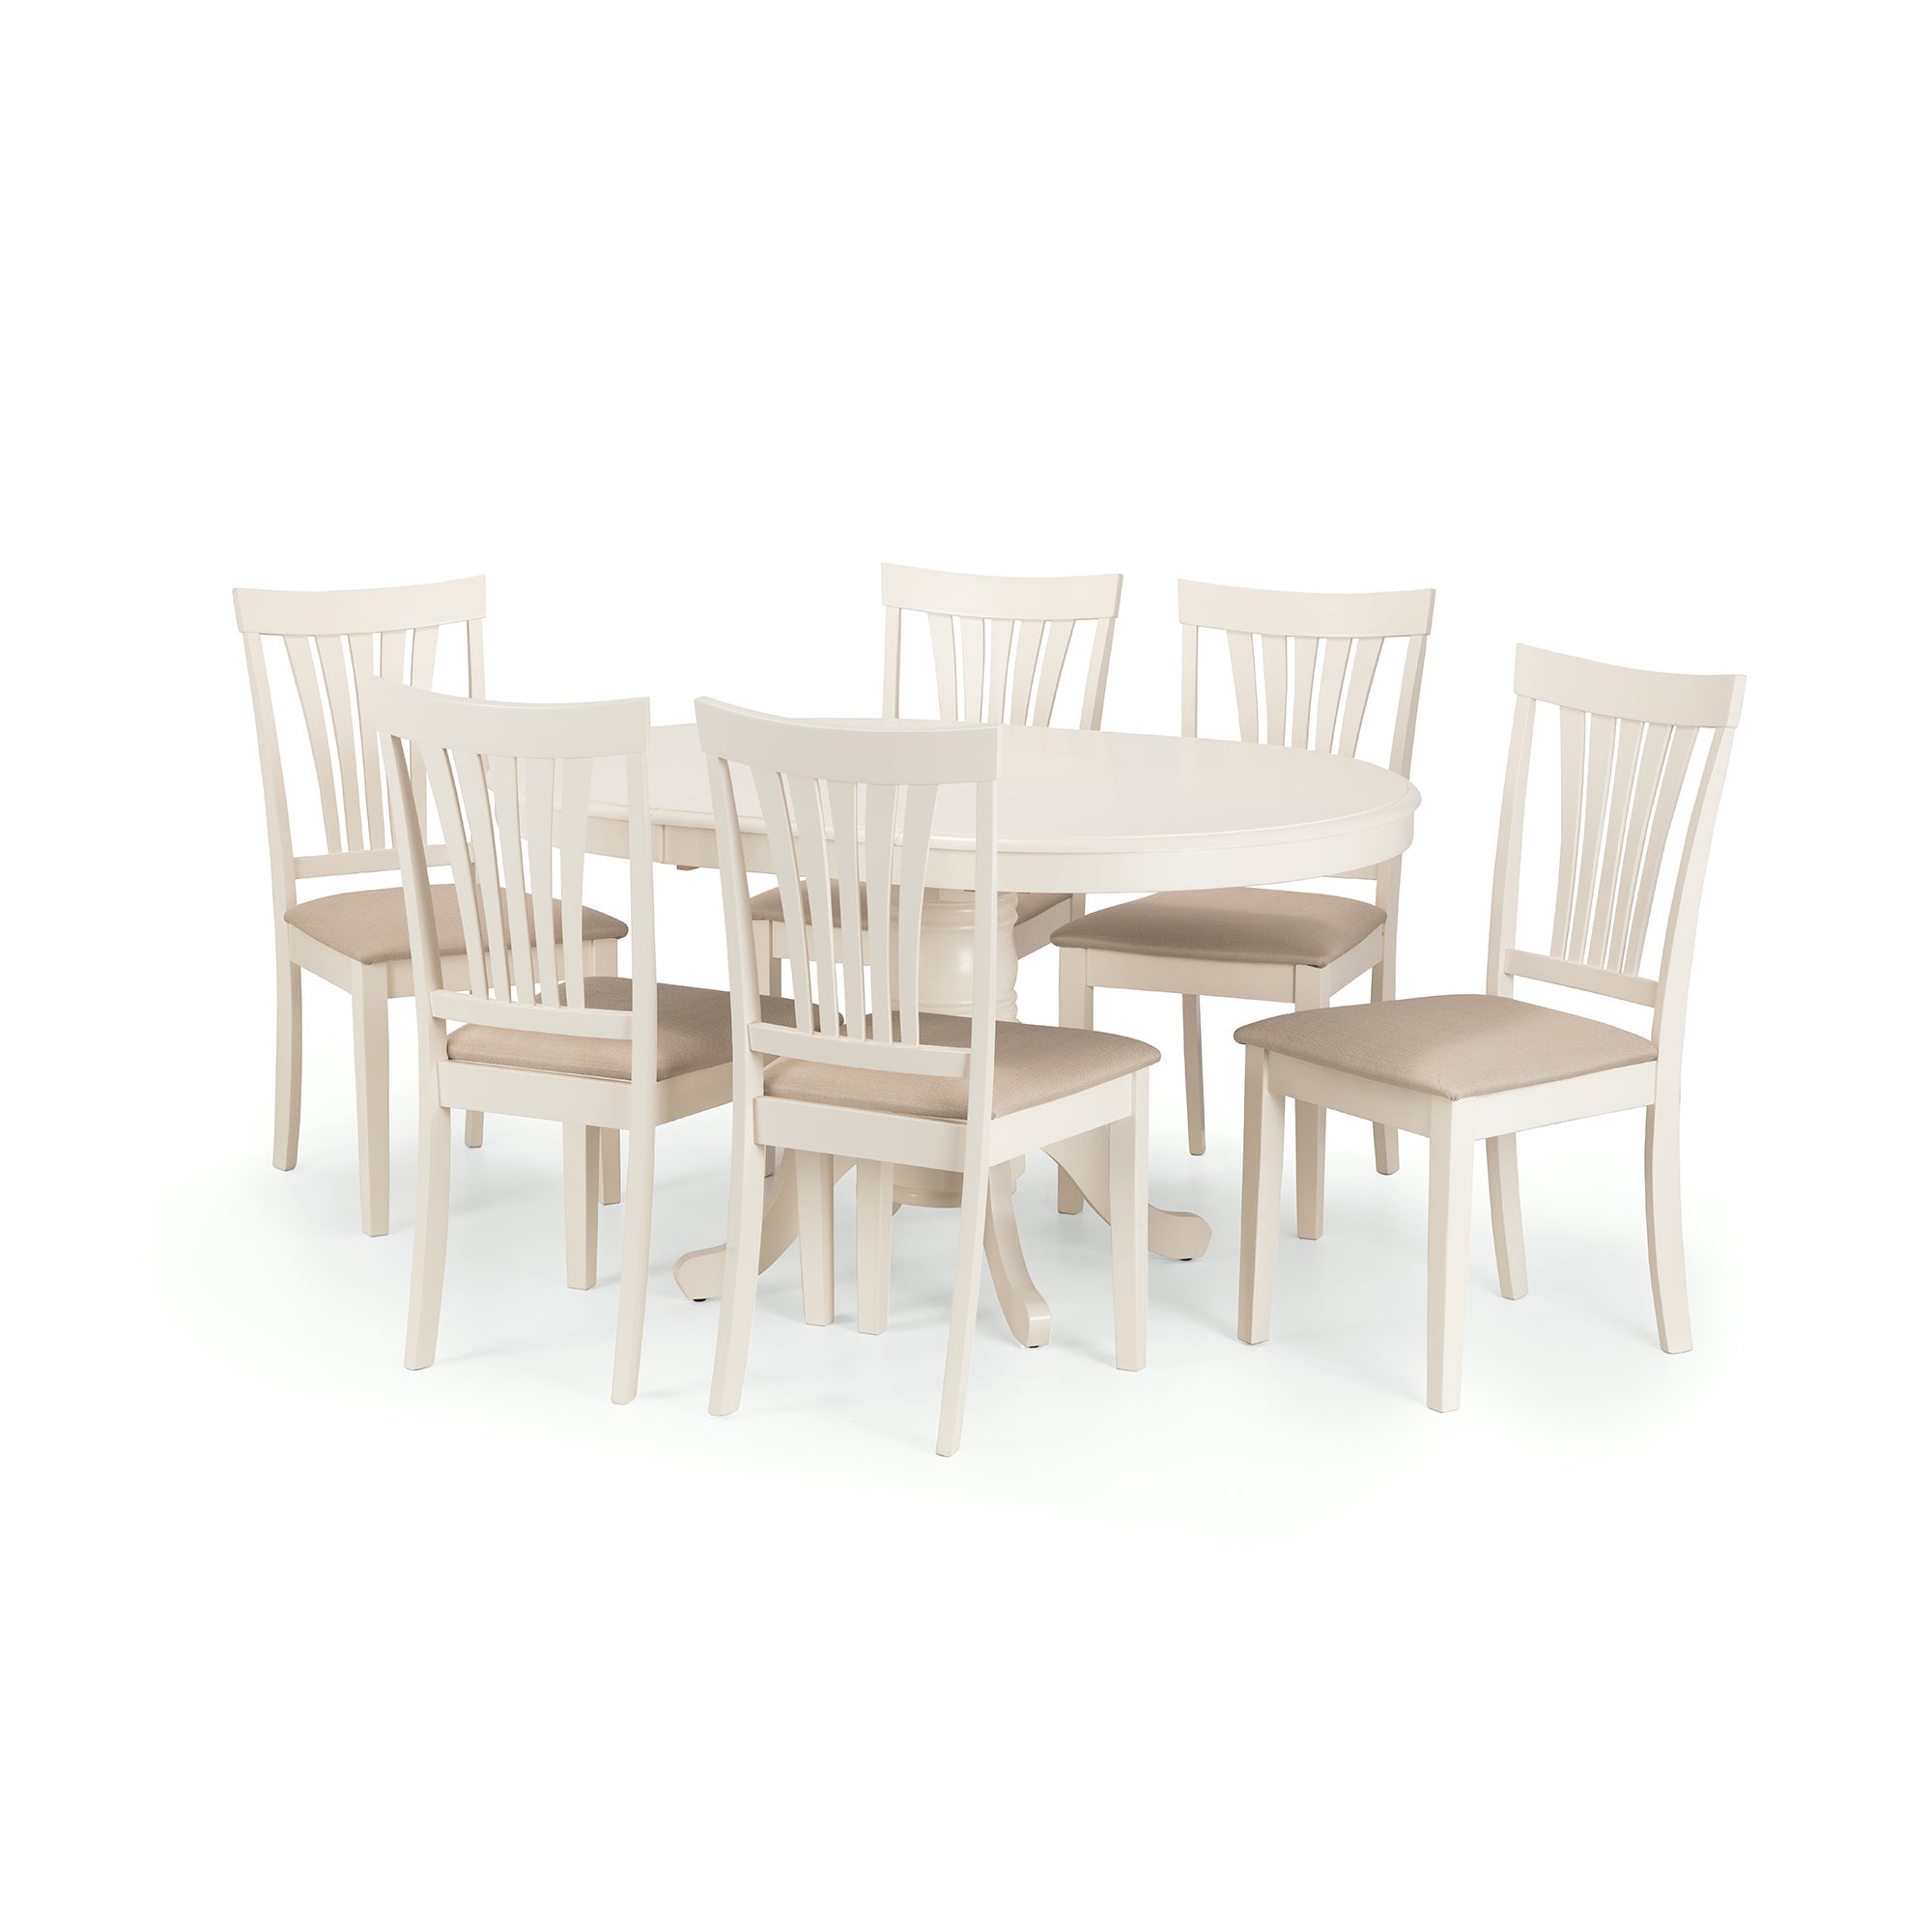 Stanmore Round Dining Table with 6 Chairs, Off White Cream